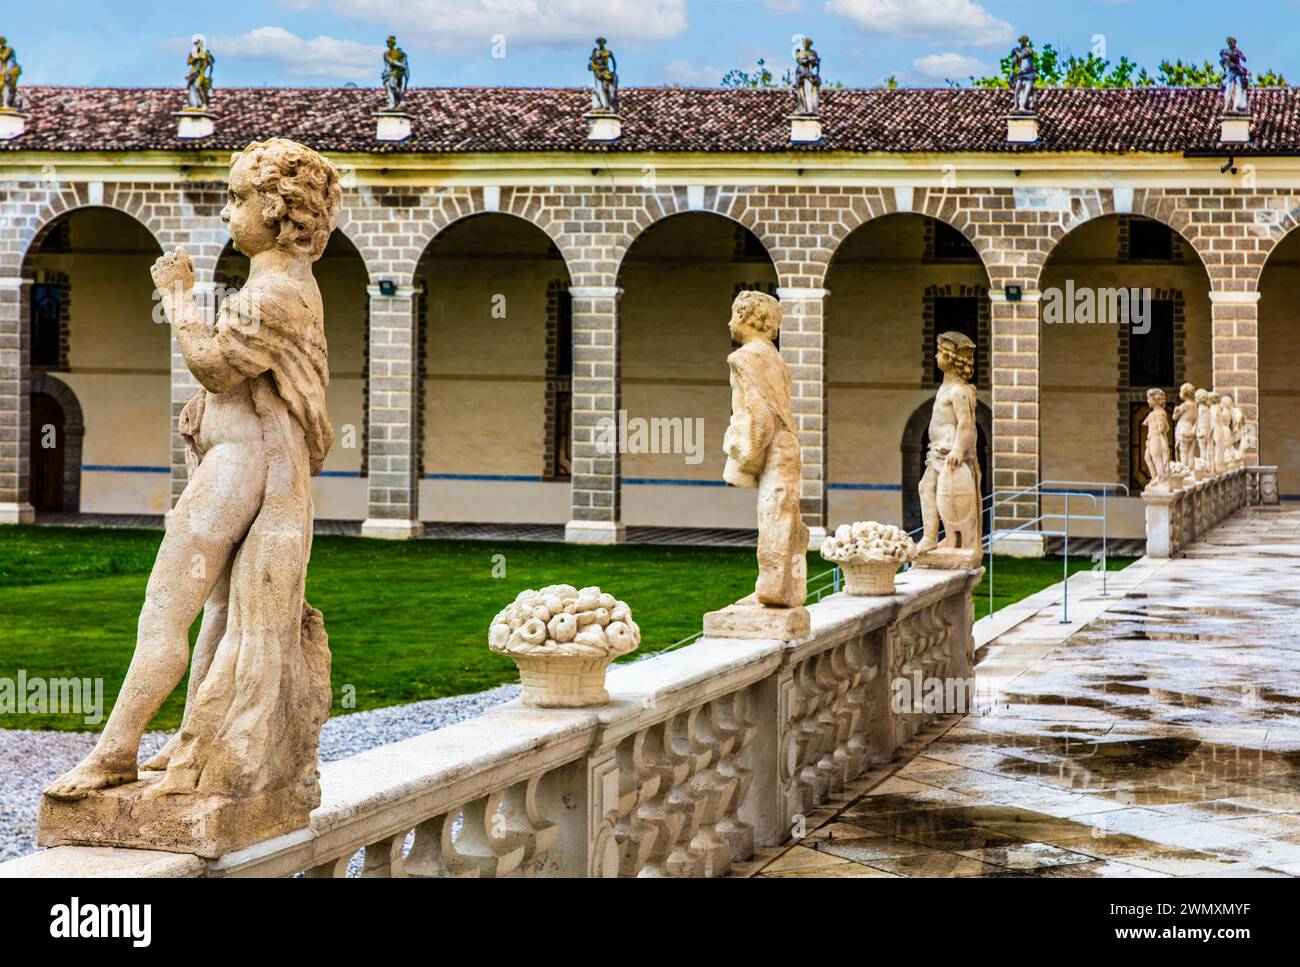 Villa Manin from the 17th century, residence of Ludovico Manin, the last Doge of Venice, Codroipo, Friuli, Italy, Codroipo, Friuli, Italy Stock Photo